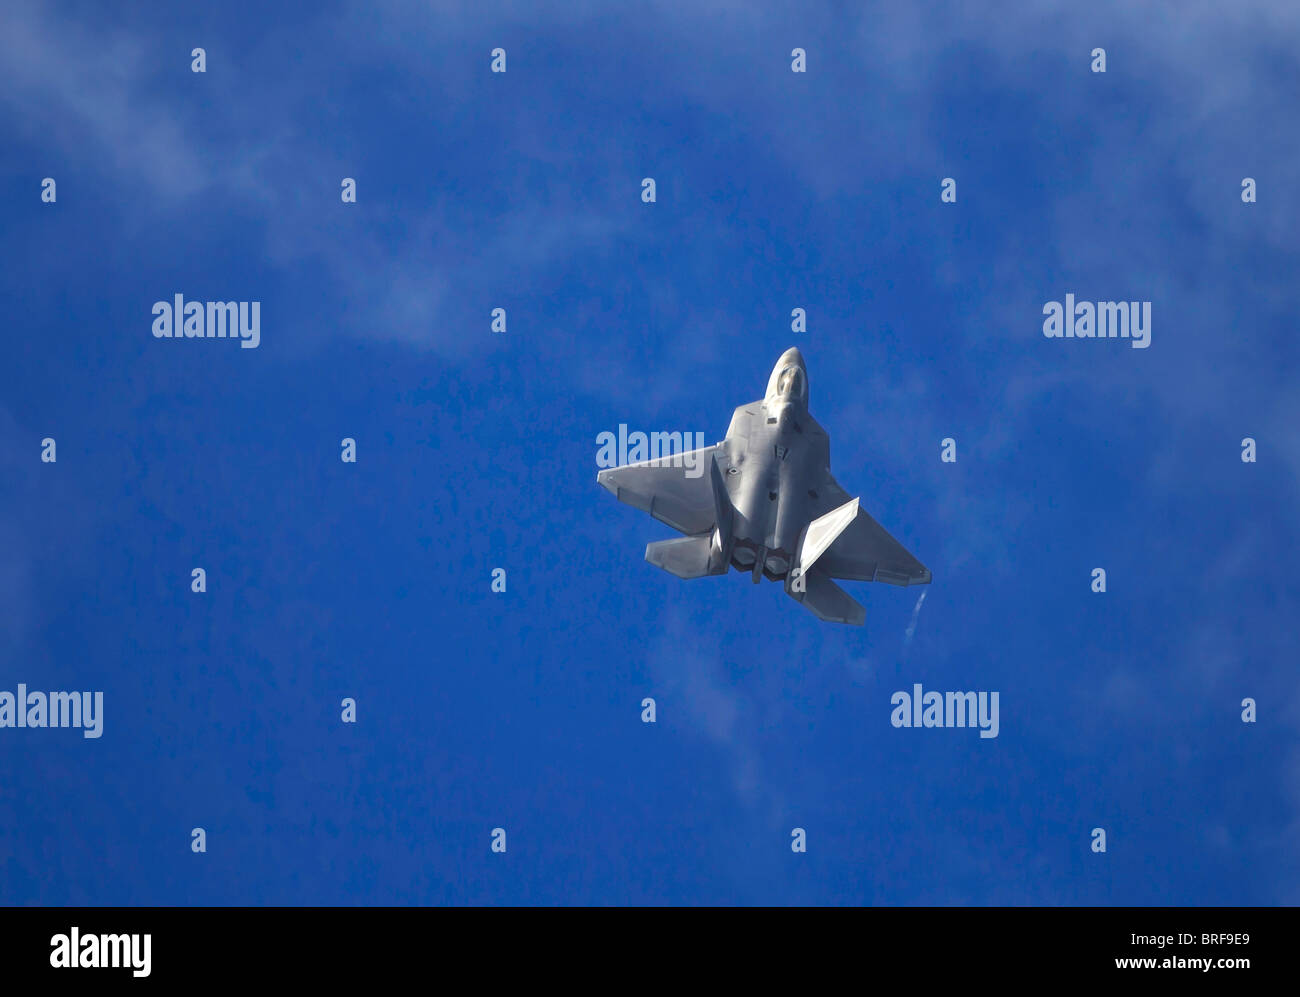 An F-22 Raptor of the U.S. Air Force demonstrates its capabilities at the Kaneohe Bay Airshow in Hawaii Stock Photo